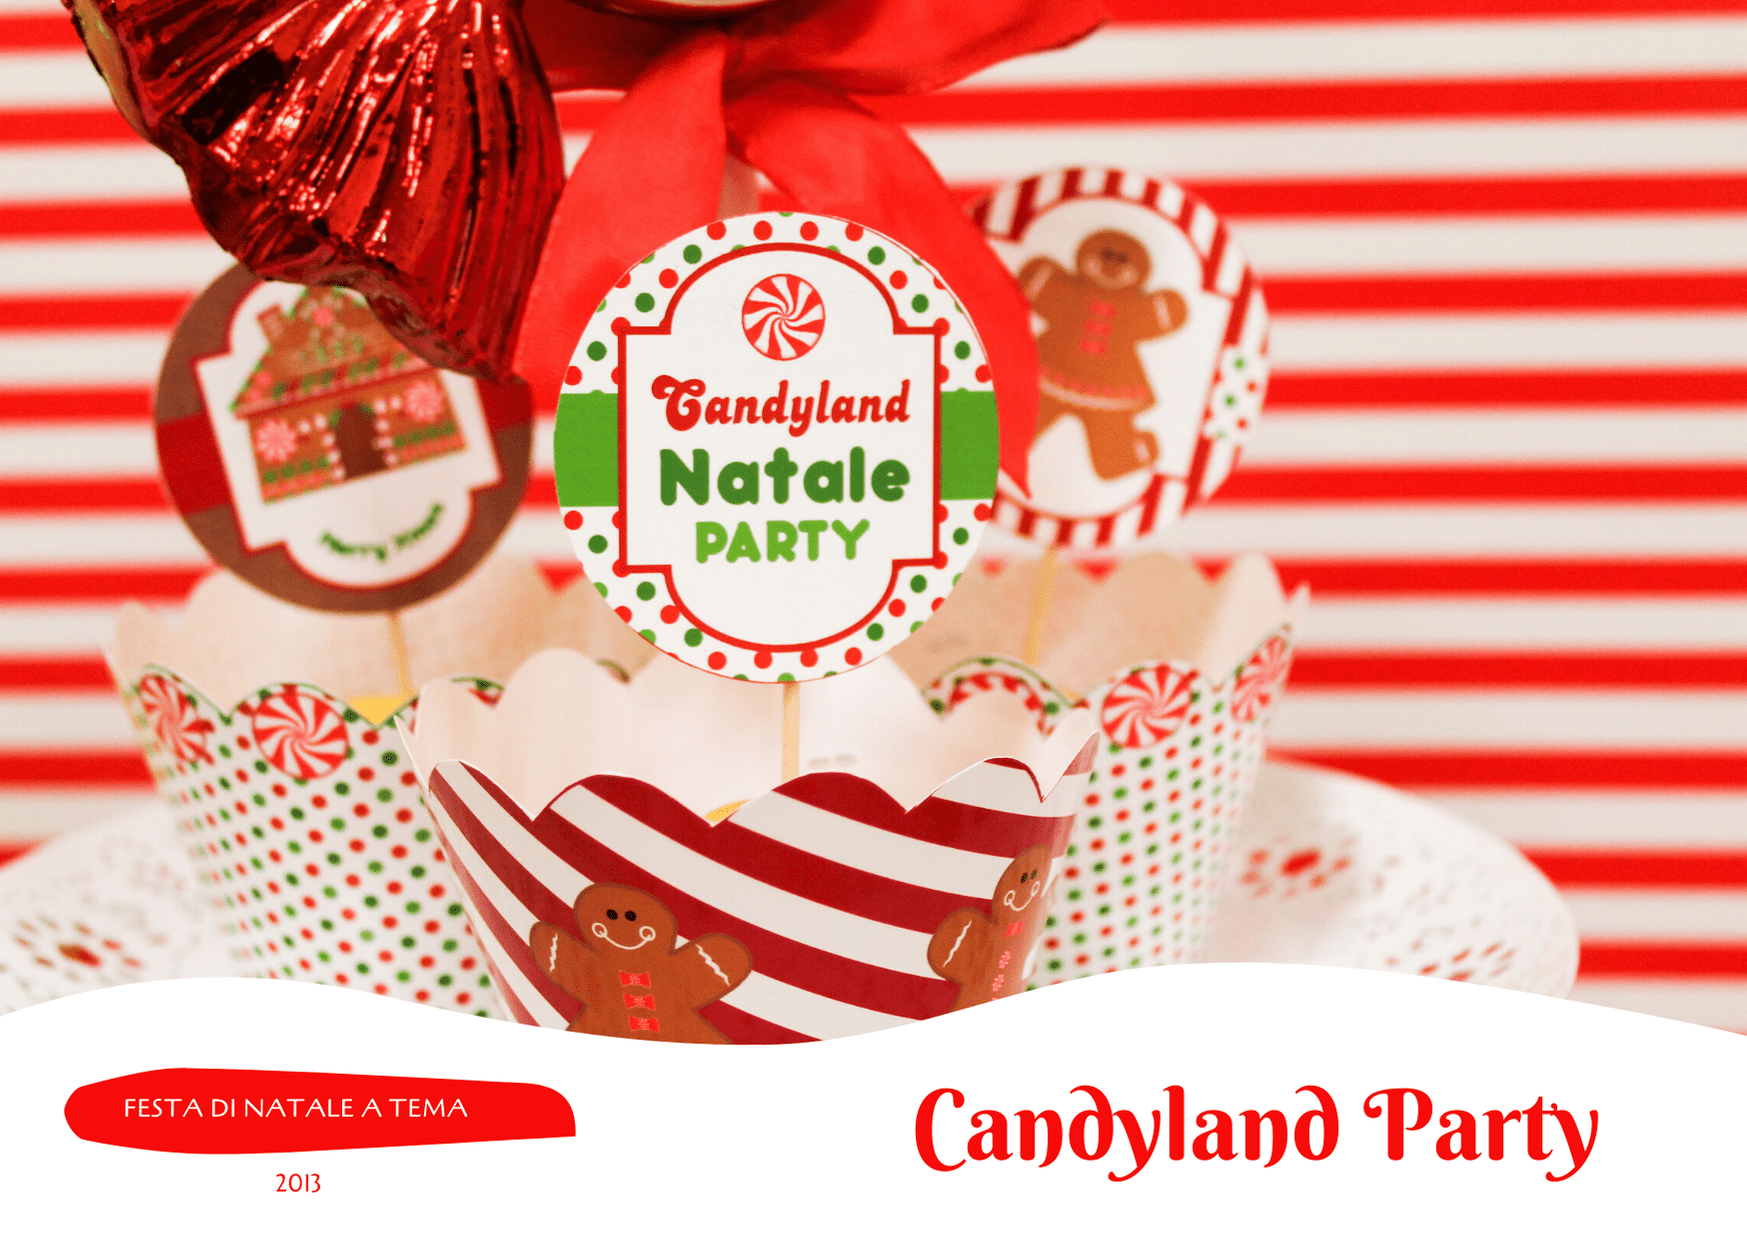 Candyland di natale party 2013